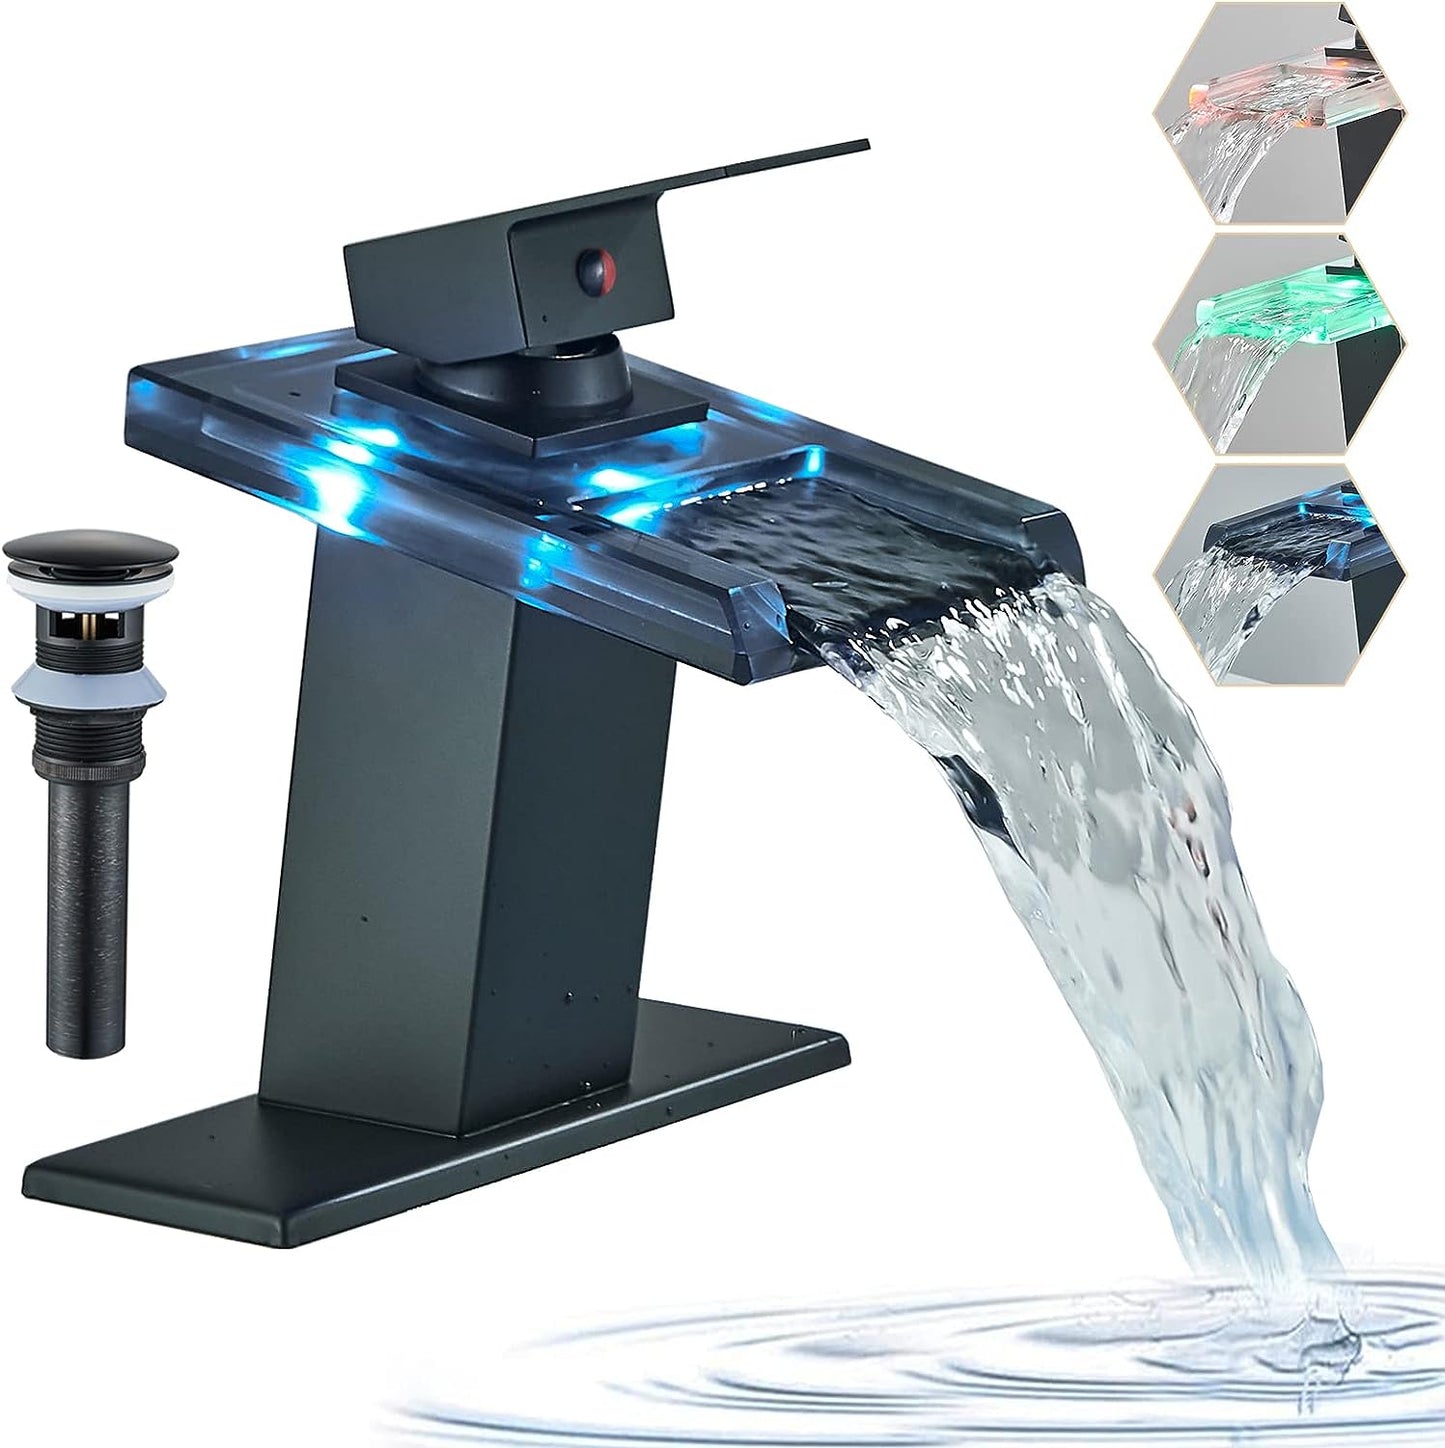 LED Bathroom Sink Faucet, Matte Black Bathroom Faucet Single Handle Waterfall Glass Spout Vanity RV Bathroom Faucets for Sink 1 Hole with Pop Up Drain and Water Supply Lines